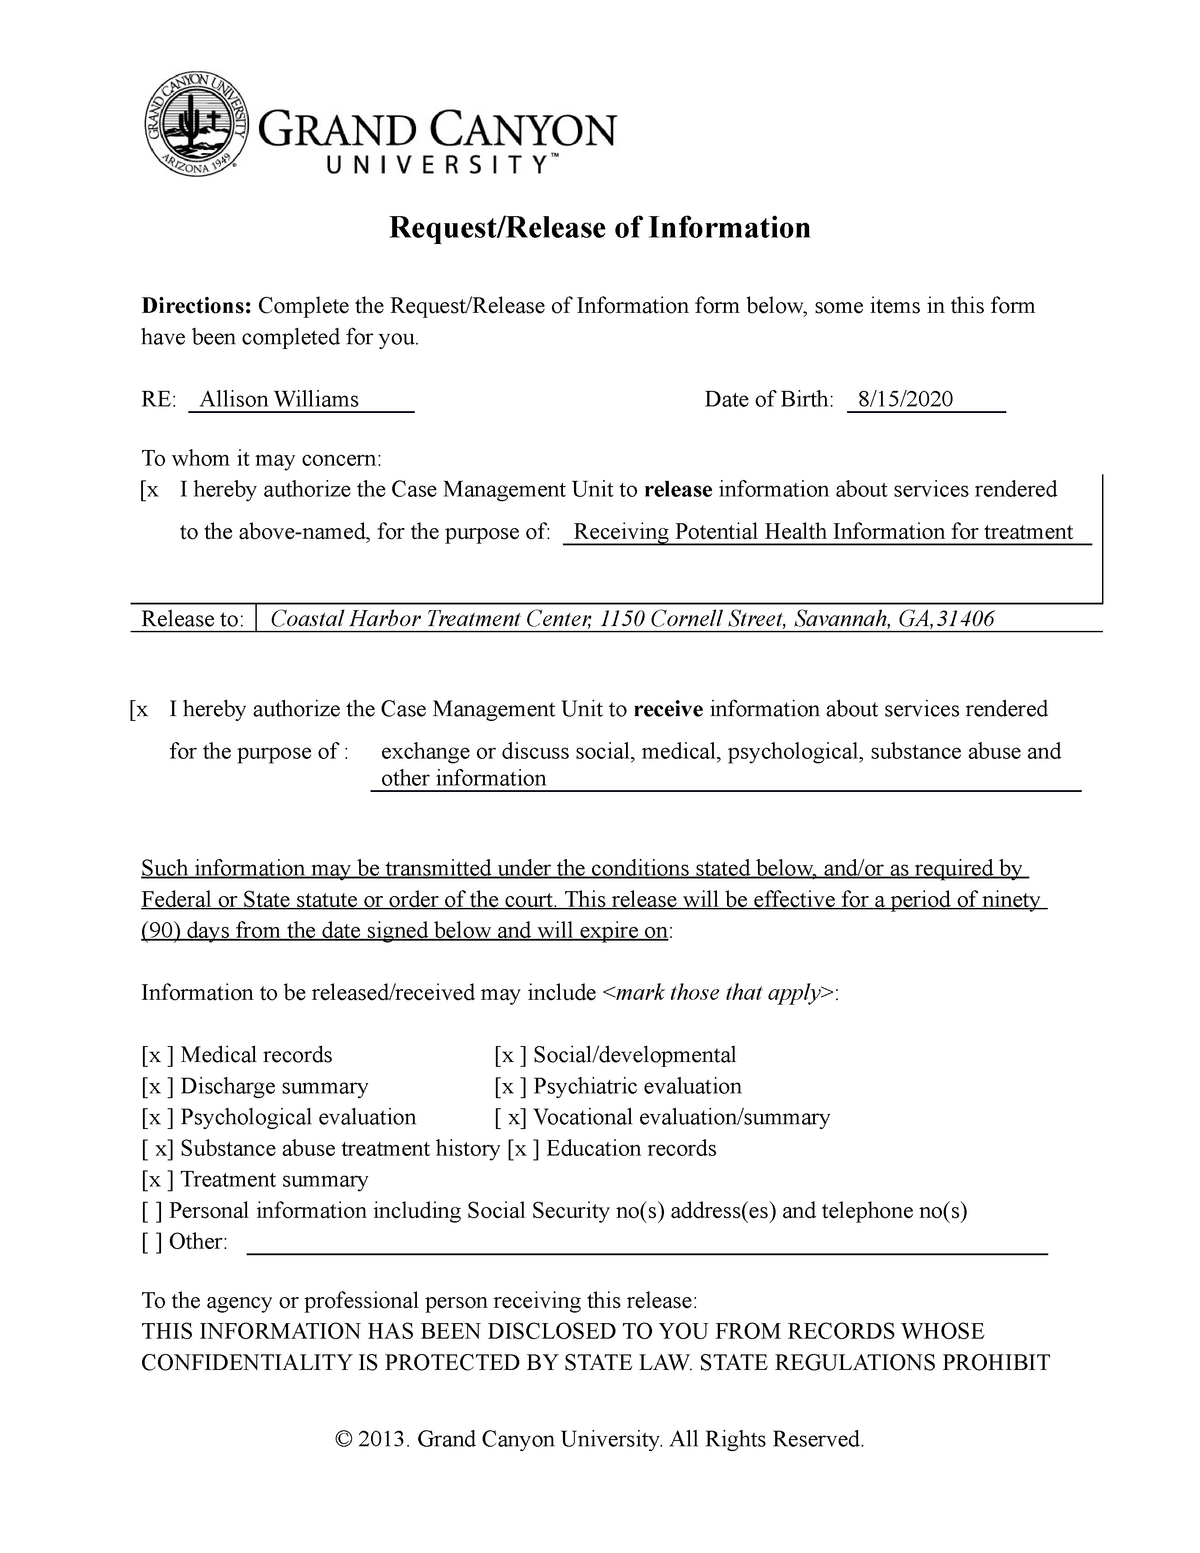 request-release-of-information-form-request-release-of-information